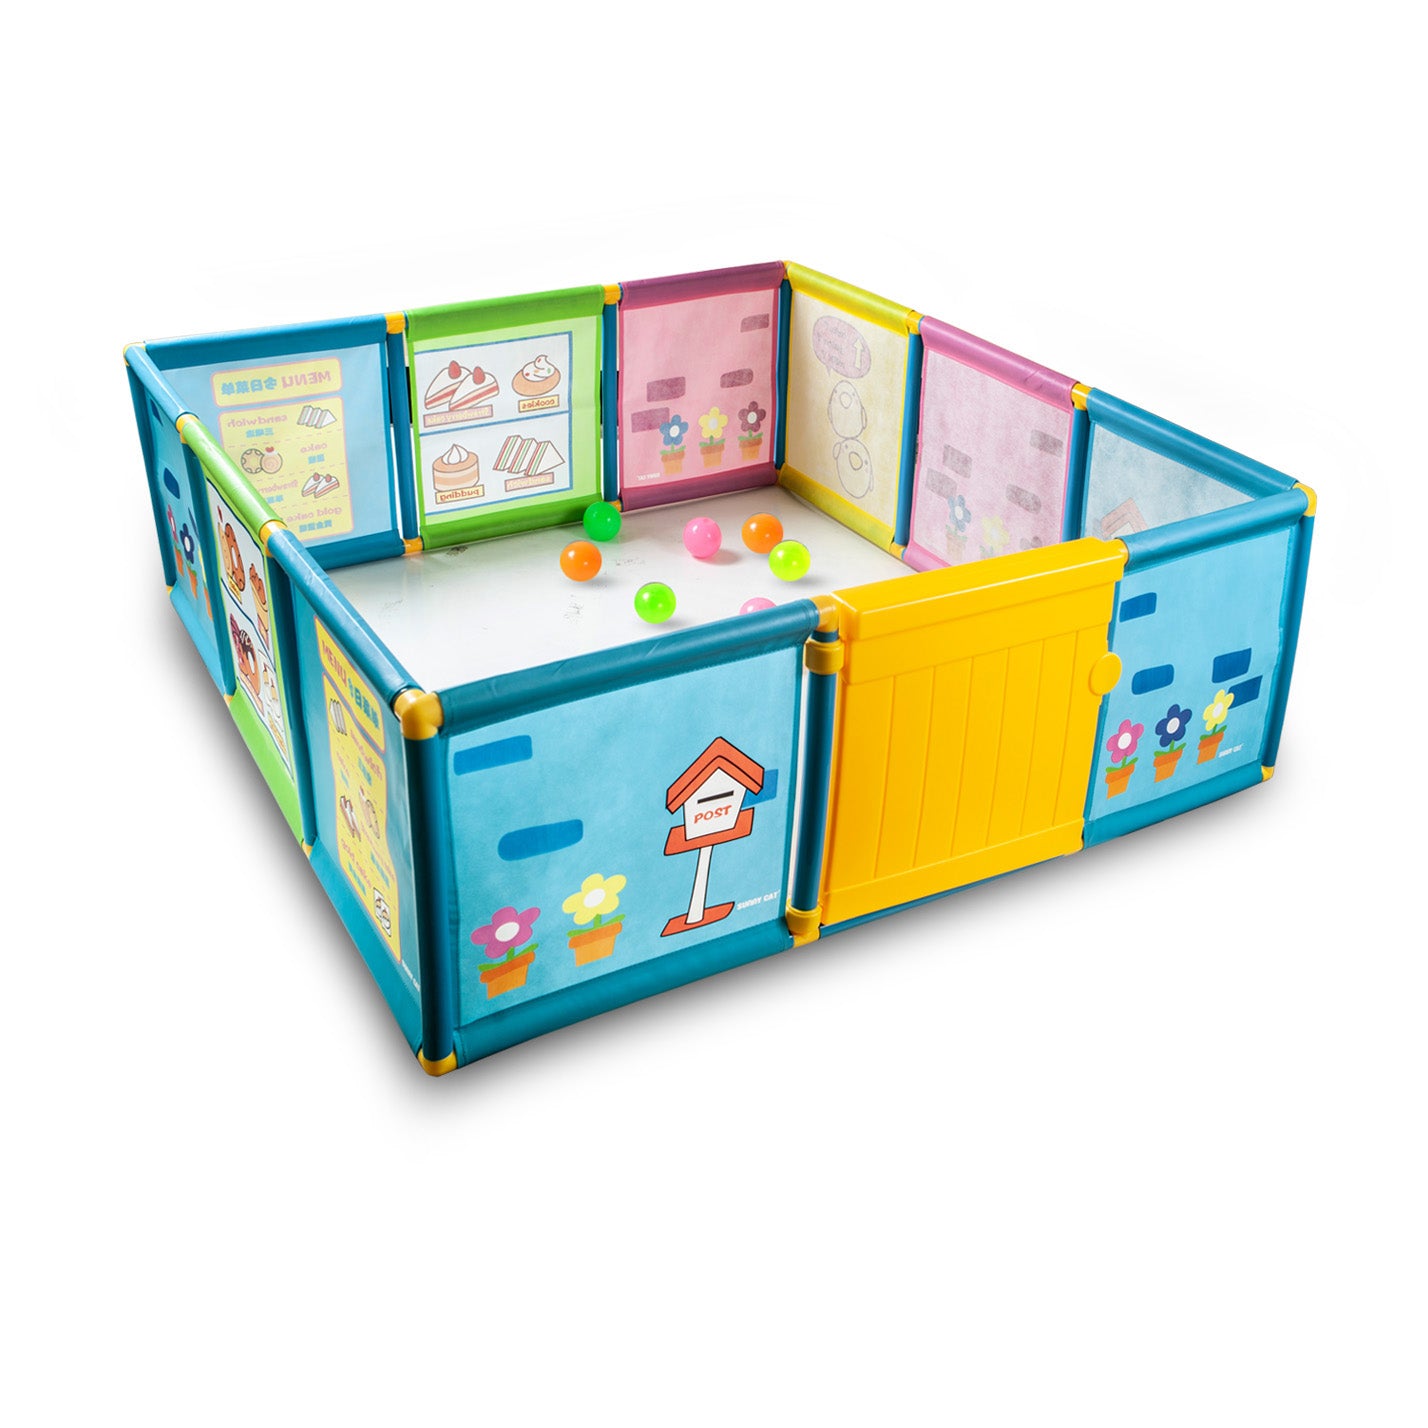 Creative Play House for Kids Play Pen Activity - Multicolour - Baby Moo